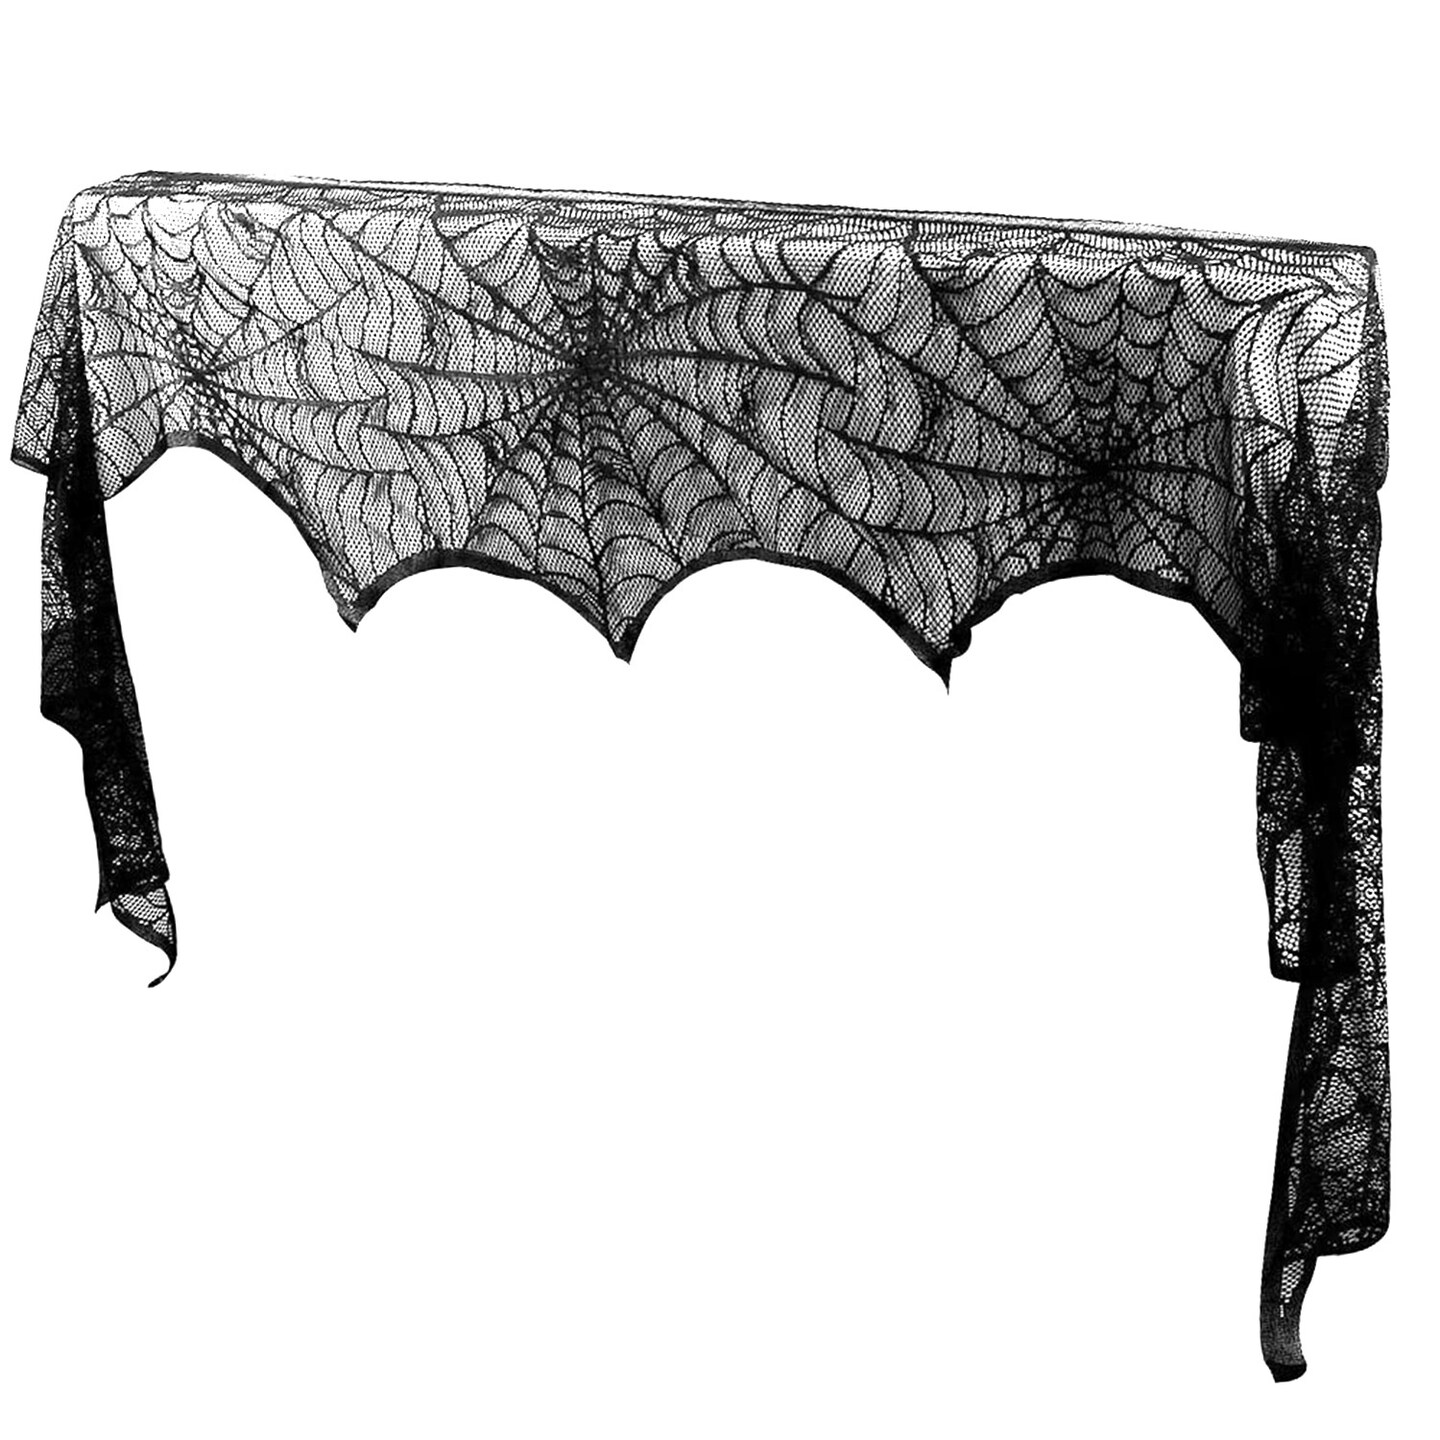 Global Phoenix Halloween Decoration Black Lace Spiderweb Fireplace Mantle Scarf Cover Festive Party Supplies Fireplace Scarf